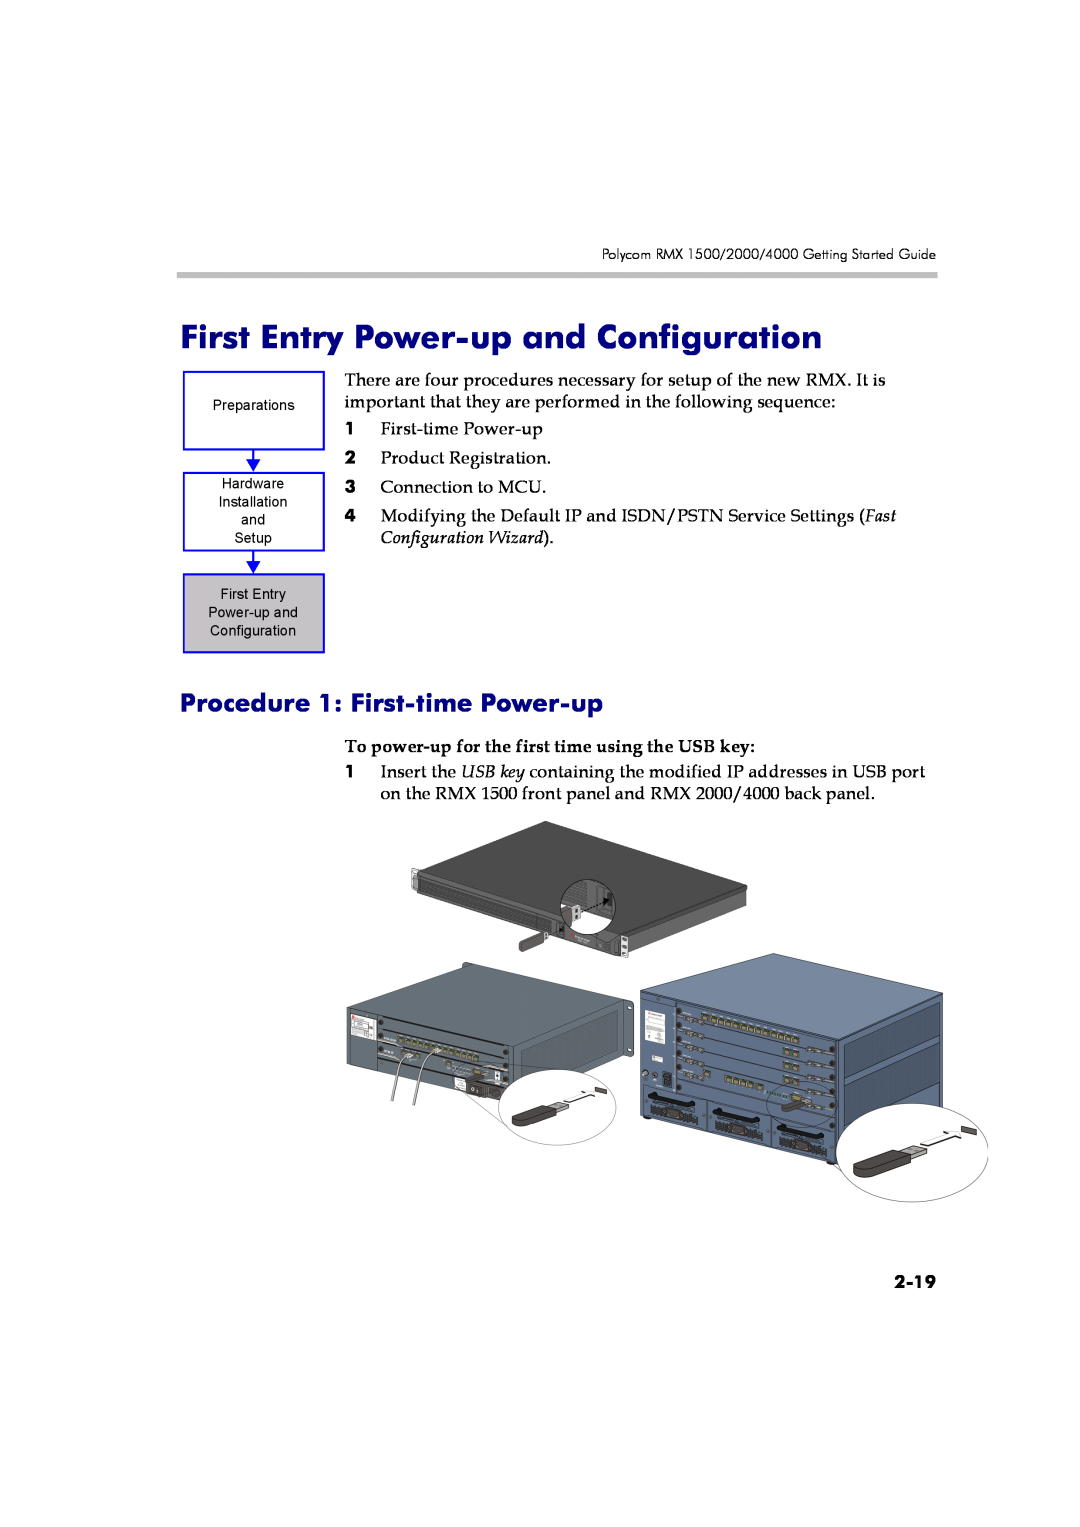 Polycom DOC2560B manual First Entry Power-up and Configuration, Procedure 1 First-time Power-up, 2-19 